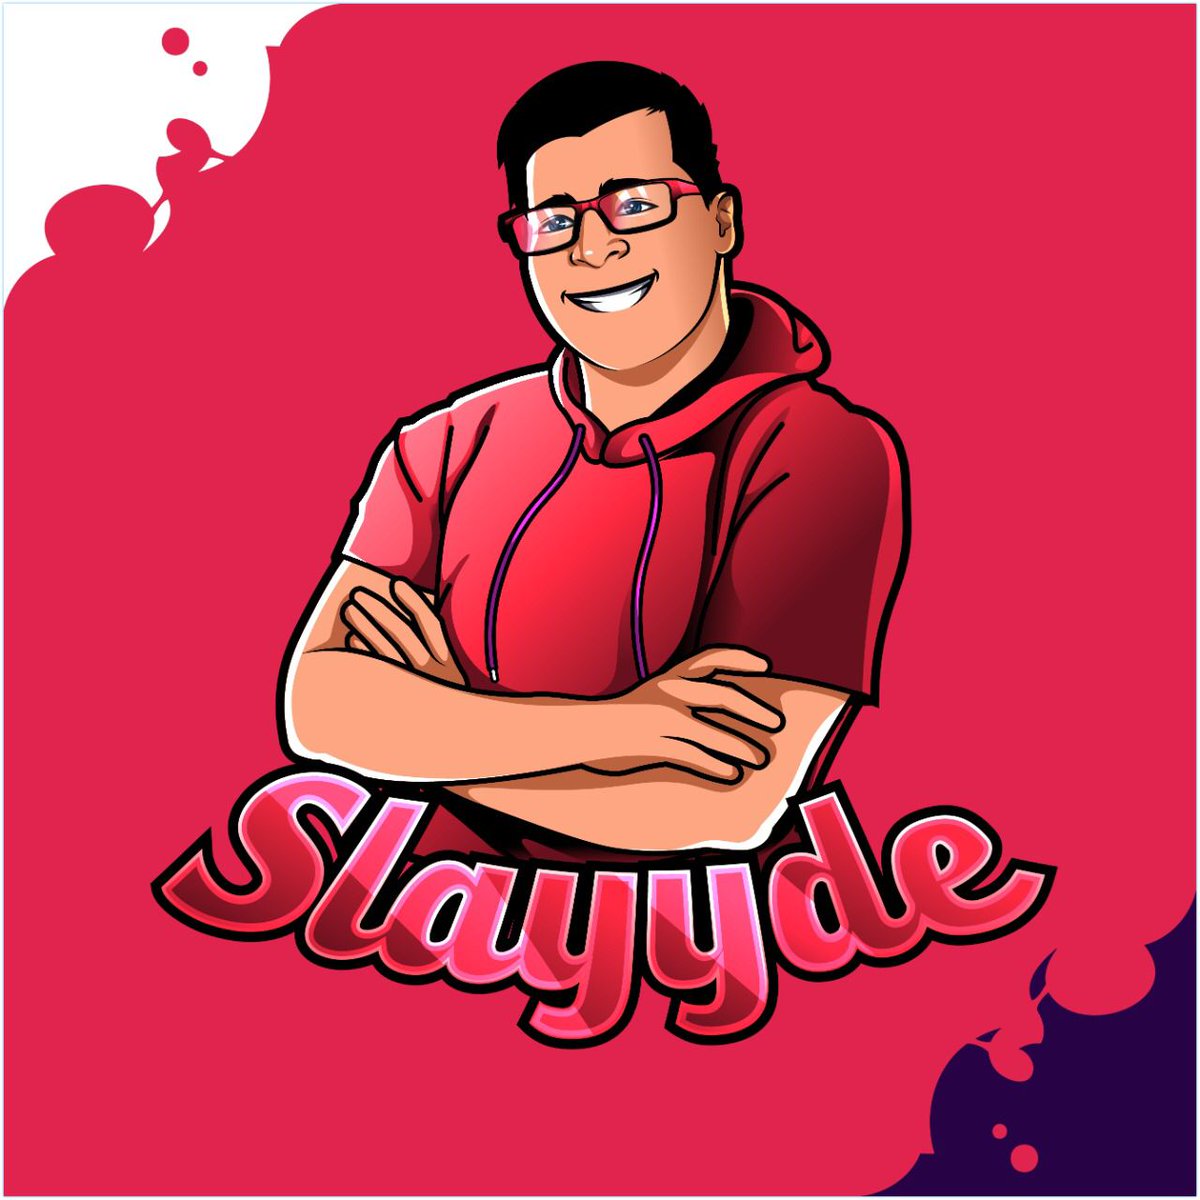 Help Every One Grow🥰
Like/#Rt/Follow👍
Link YT/#Twitch🔗
Help each other🫂
@Lanter_Solution
#SmallStreamersConnect
#SupportSmallStreamers
@streamviewers
 #gamer
#Kick 
@BlazedRTs
@FRCretweets
 #logo
 #SmallStreamer
@GamingRTweeters
@SGH_RTs
@sme_rt
@thgc_rts
@BlazedRTs